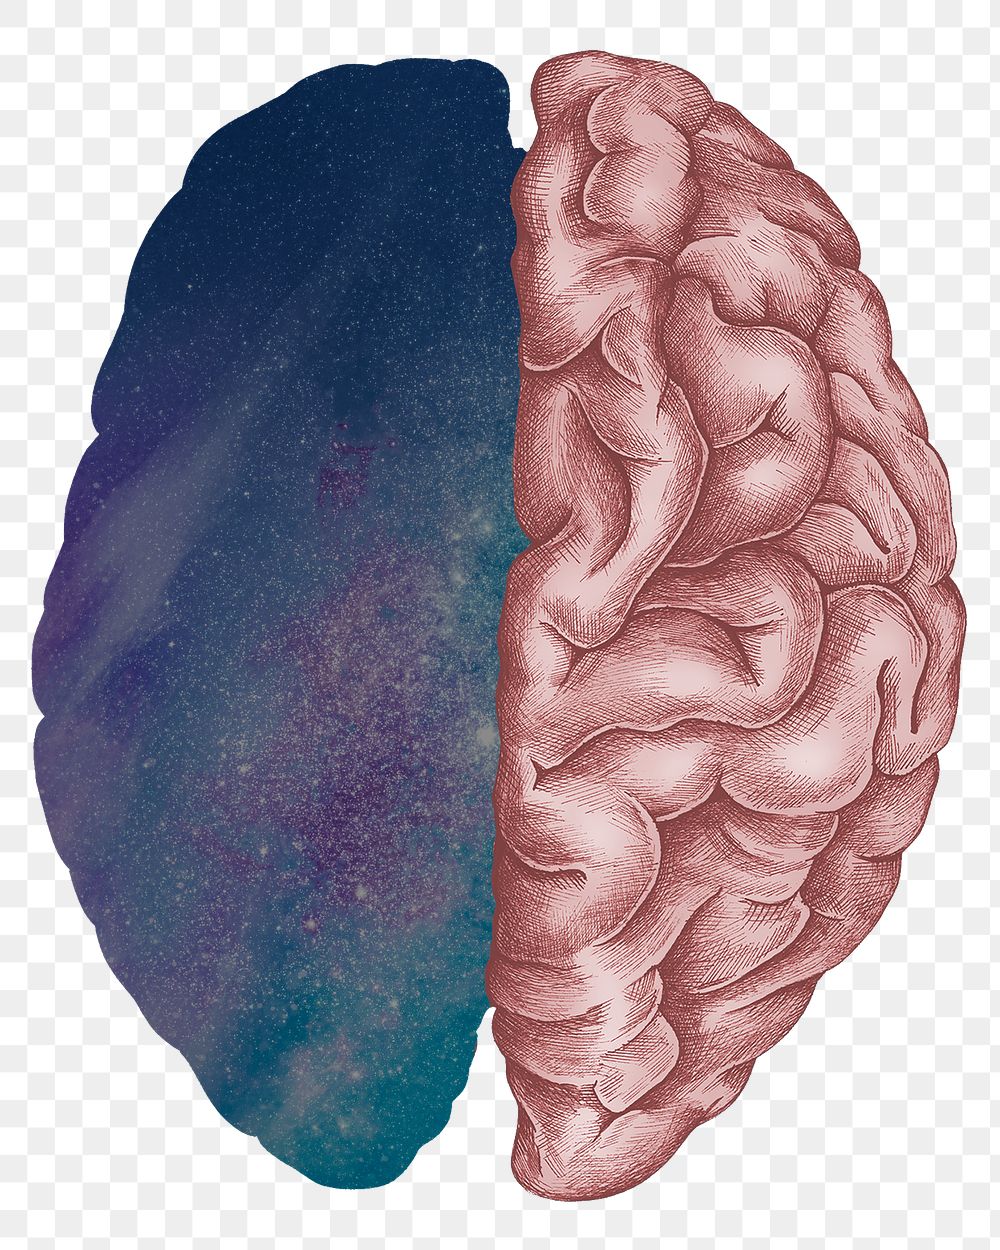 Surreal galaxy human brain png, transparent background